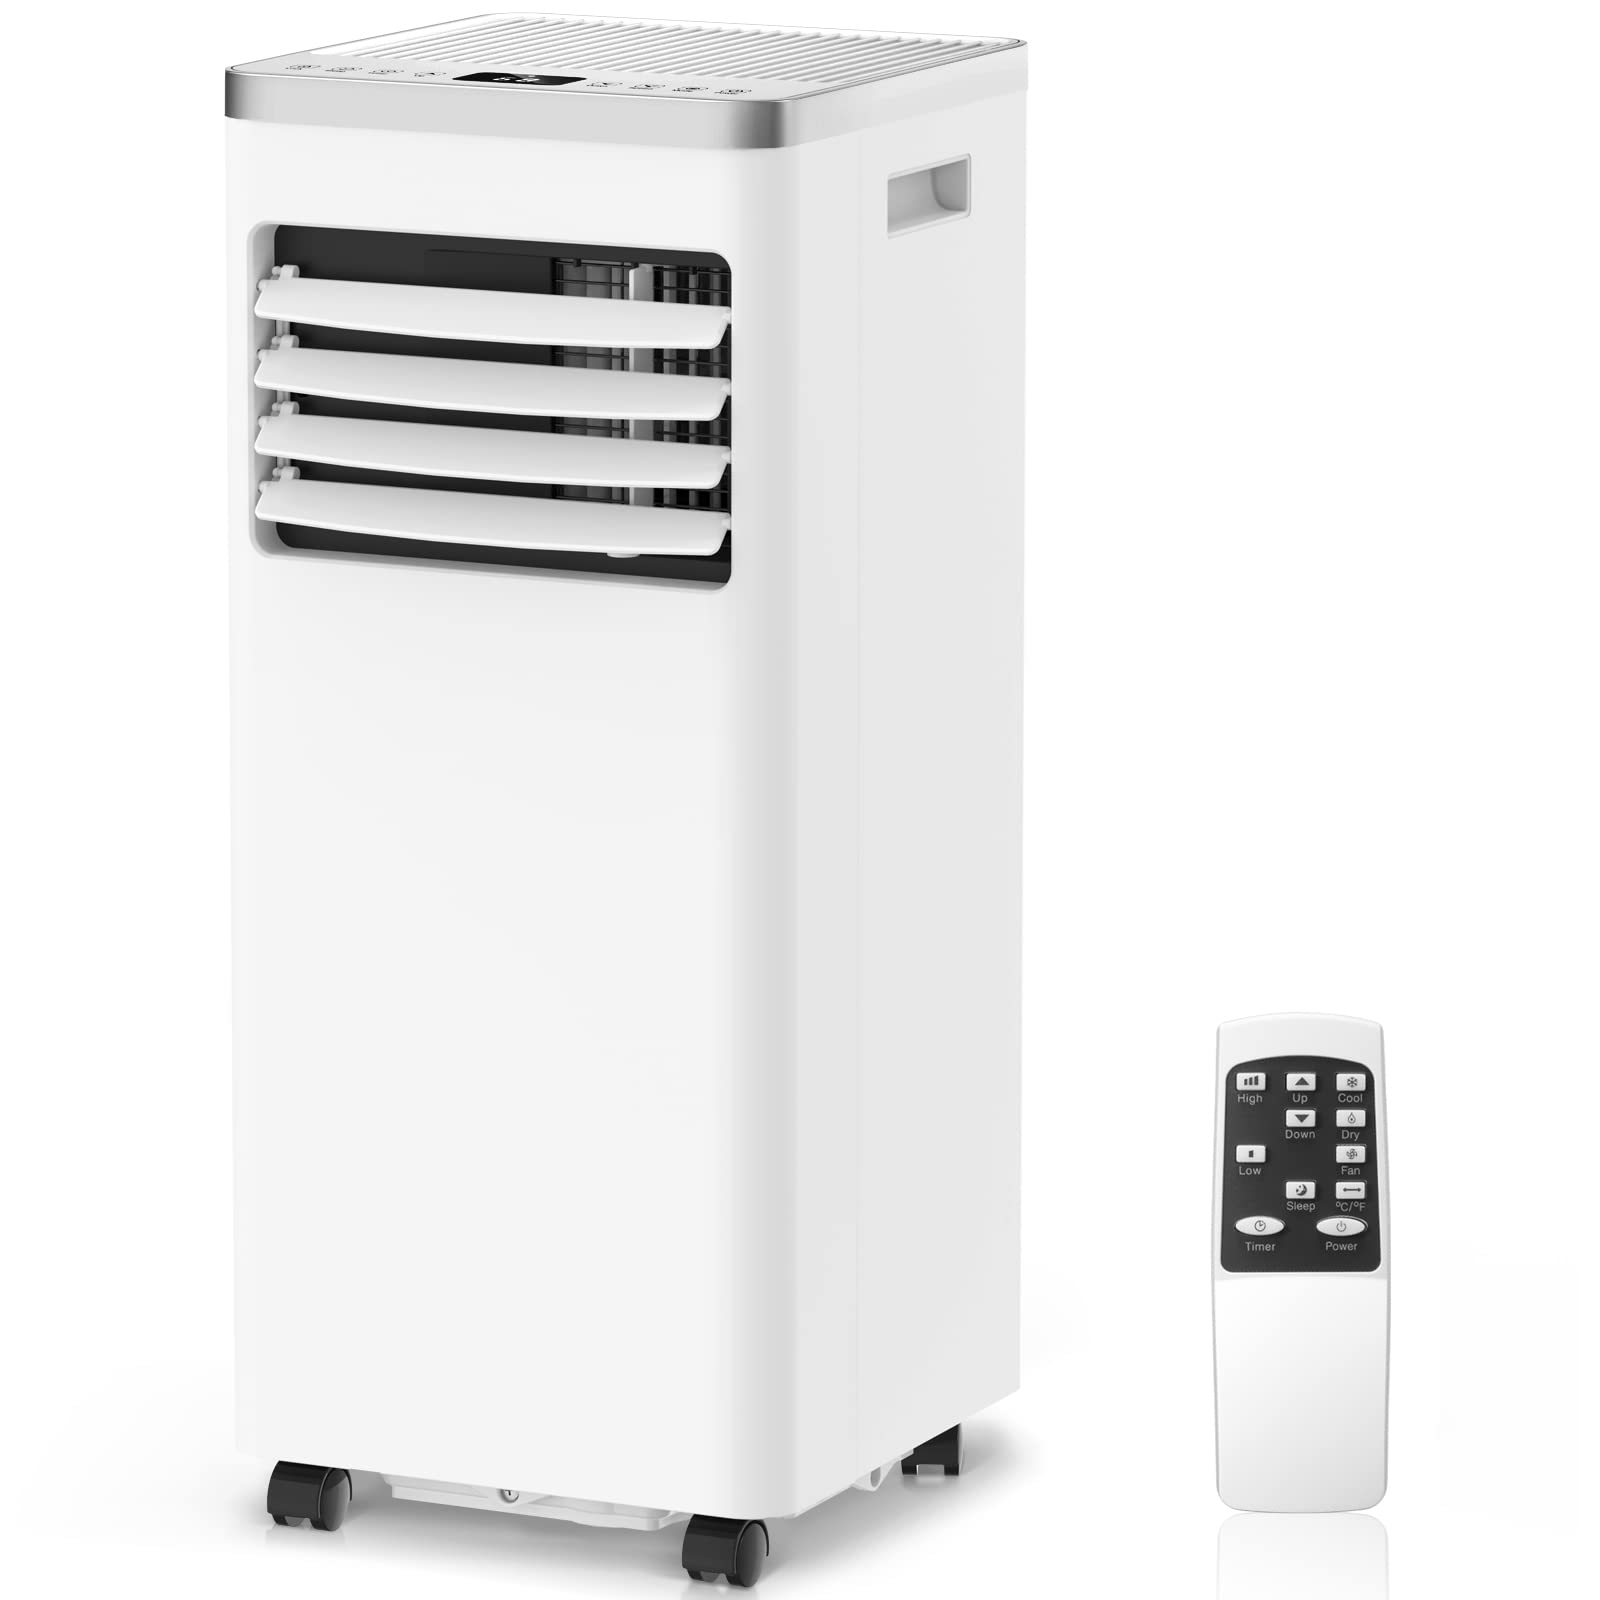 ZAFRO Portable Air Conditioner best patio air conditioner